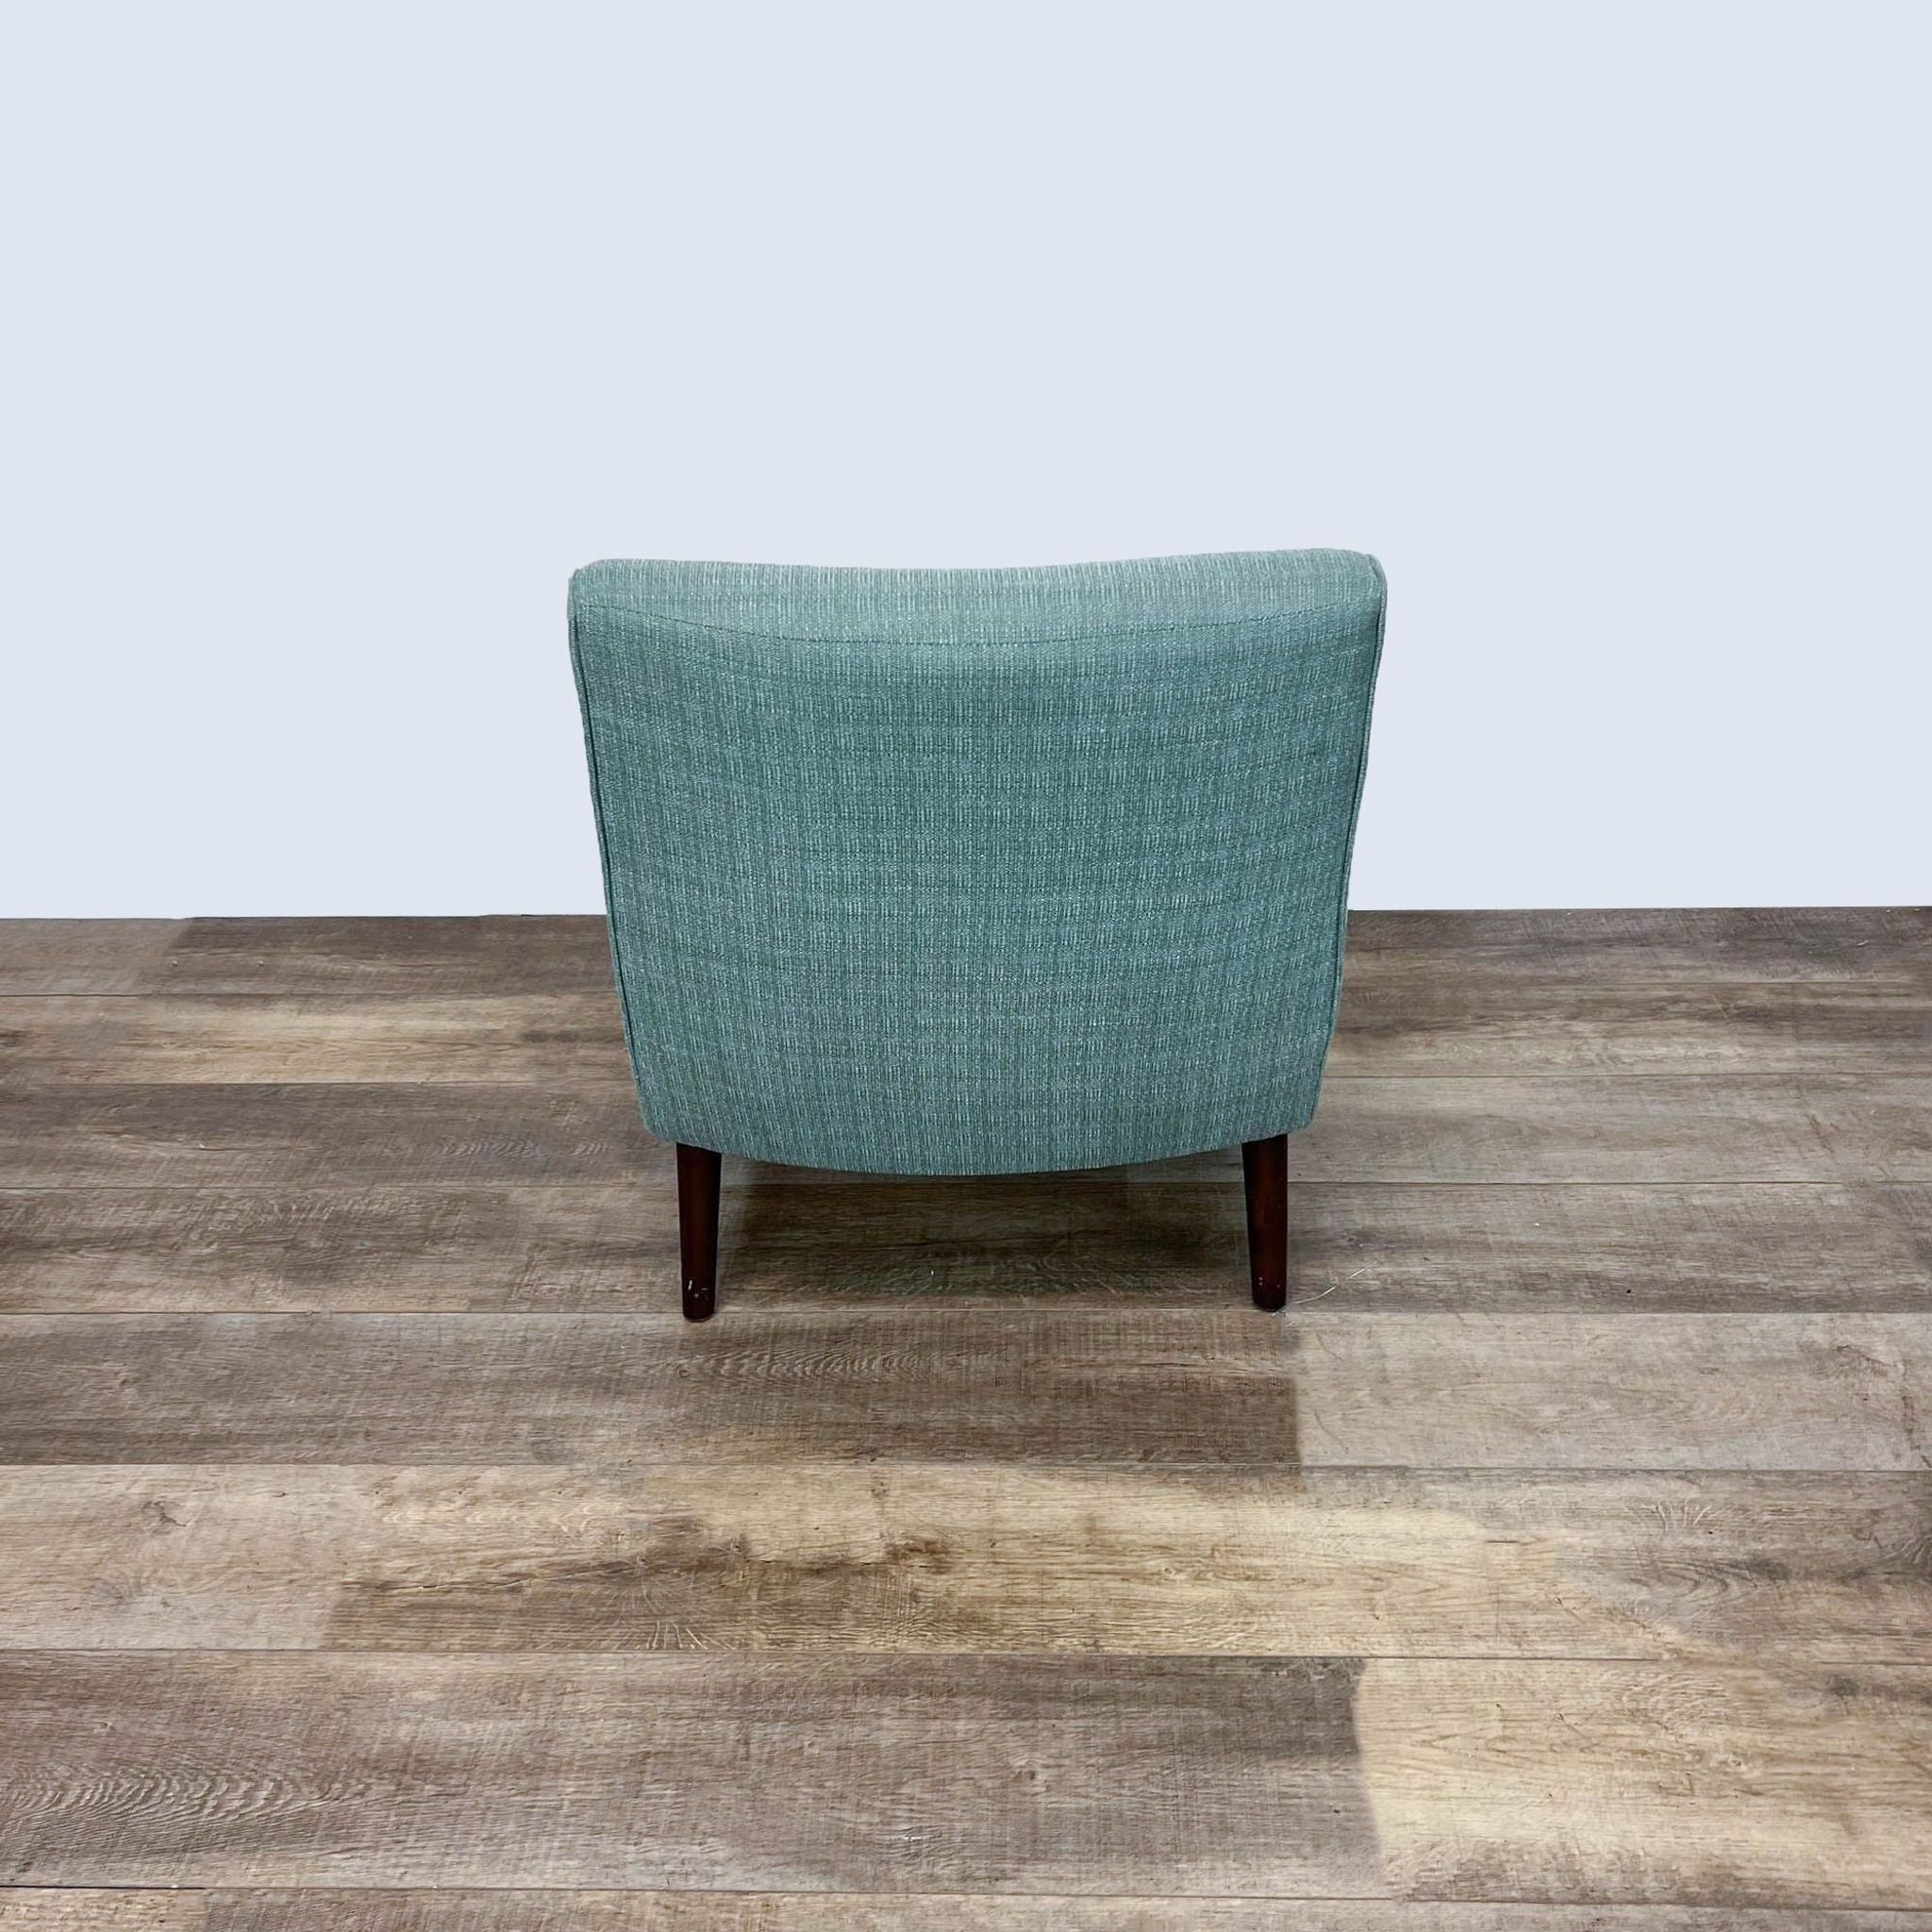 Madison Park Liam Chair with angled rubberwood legs, plywood-hardwood frame, and teal upholstered high-density foam on a wood floor.